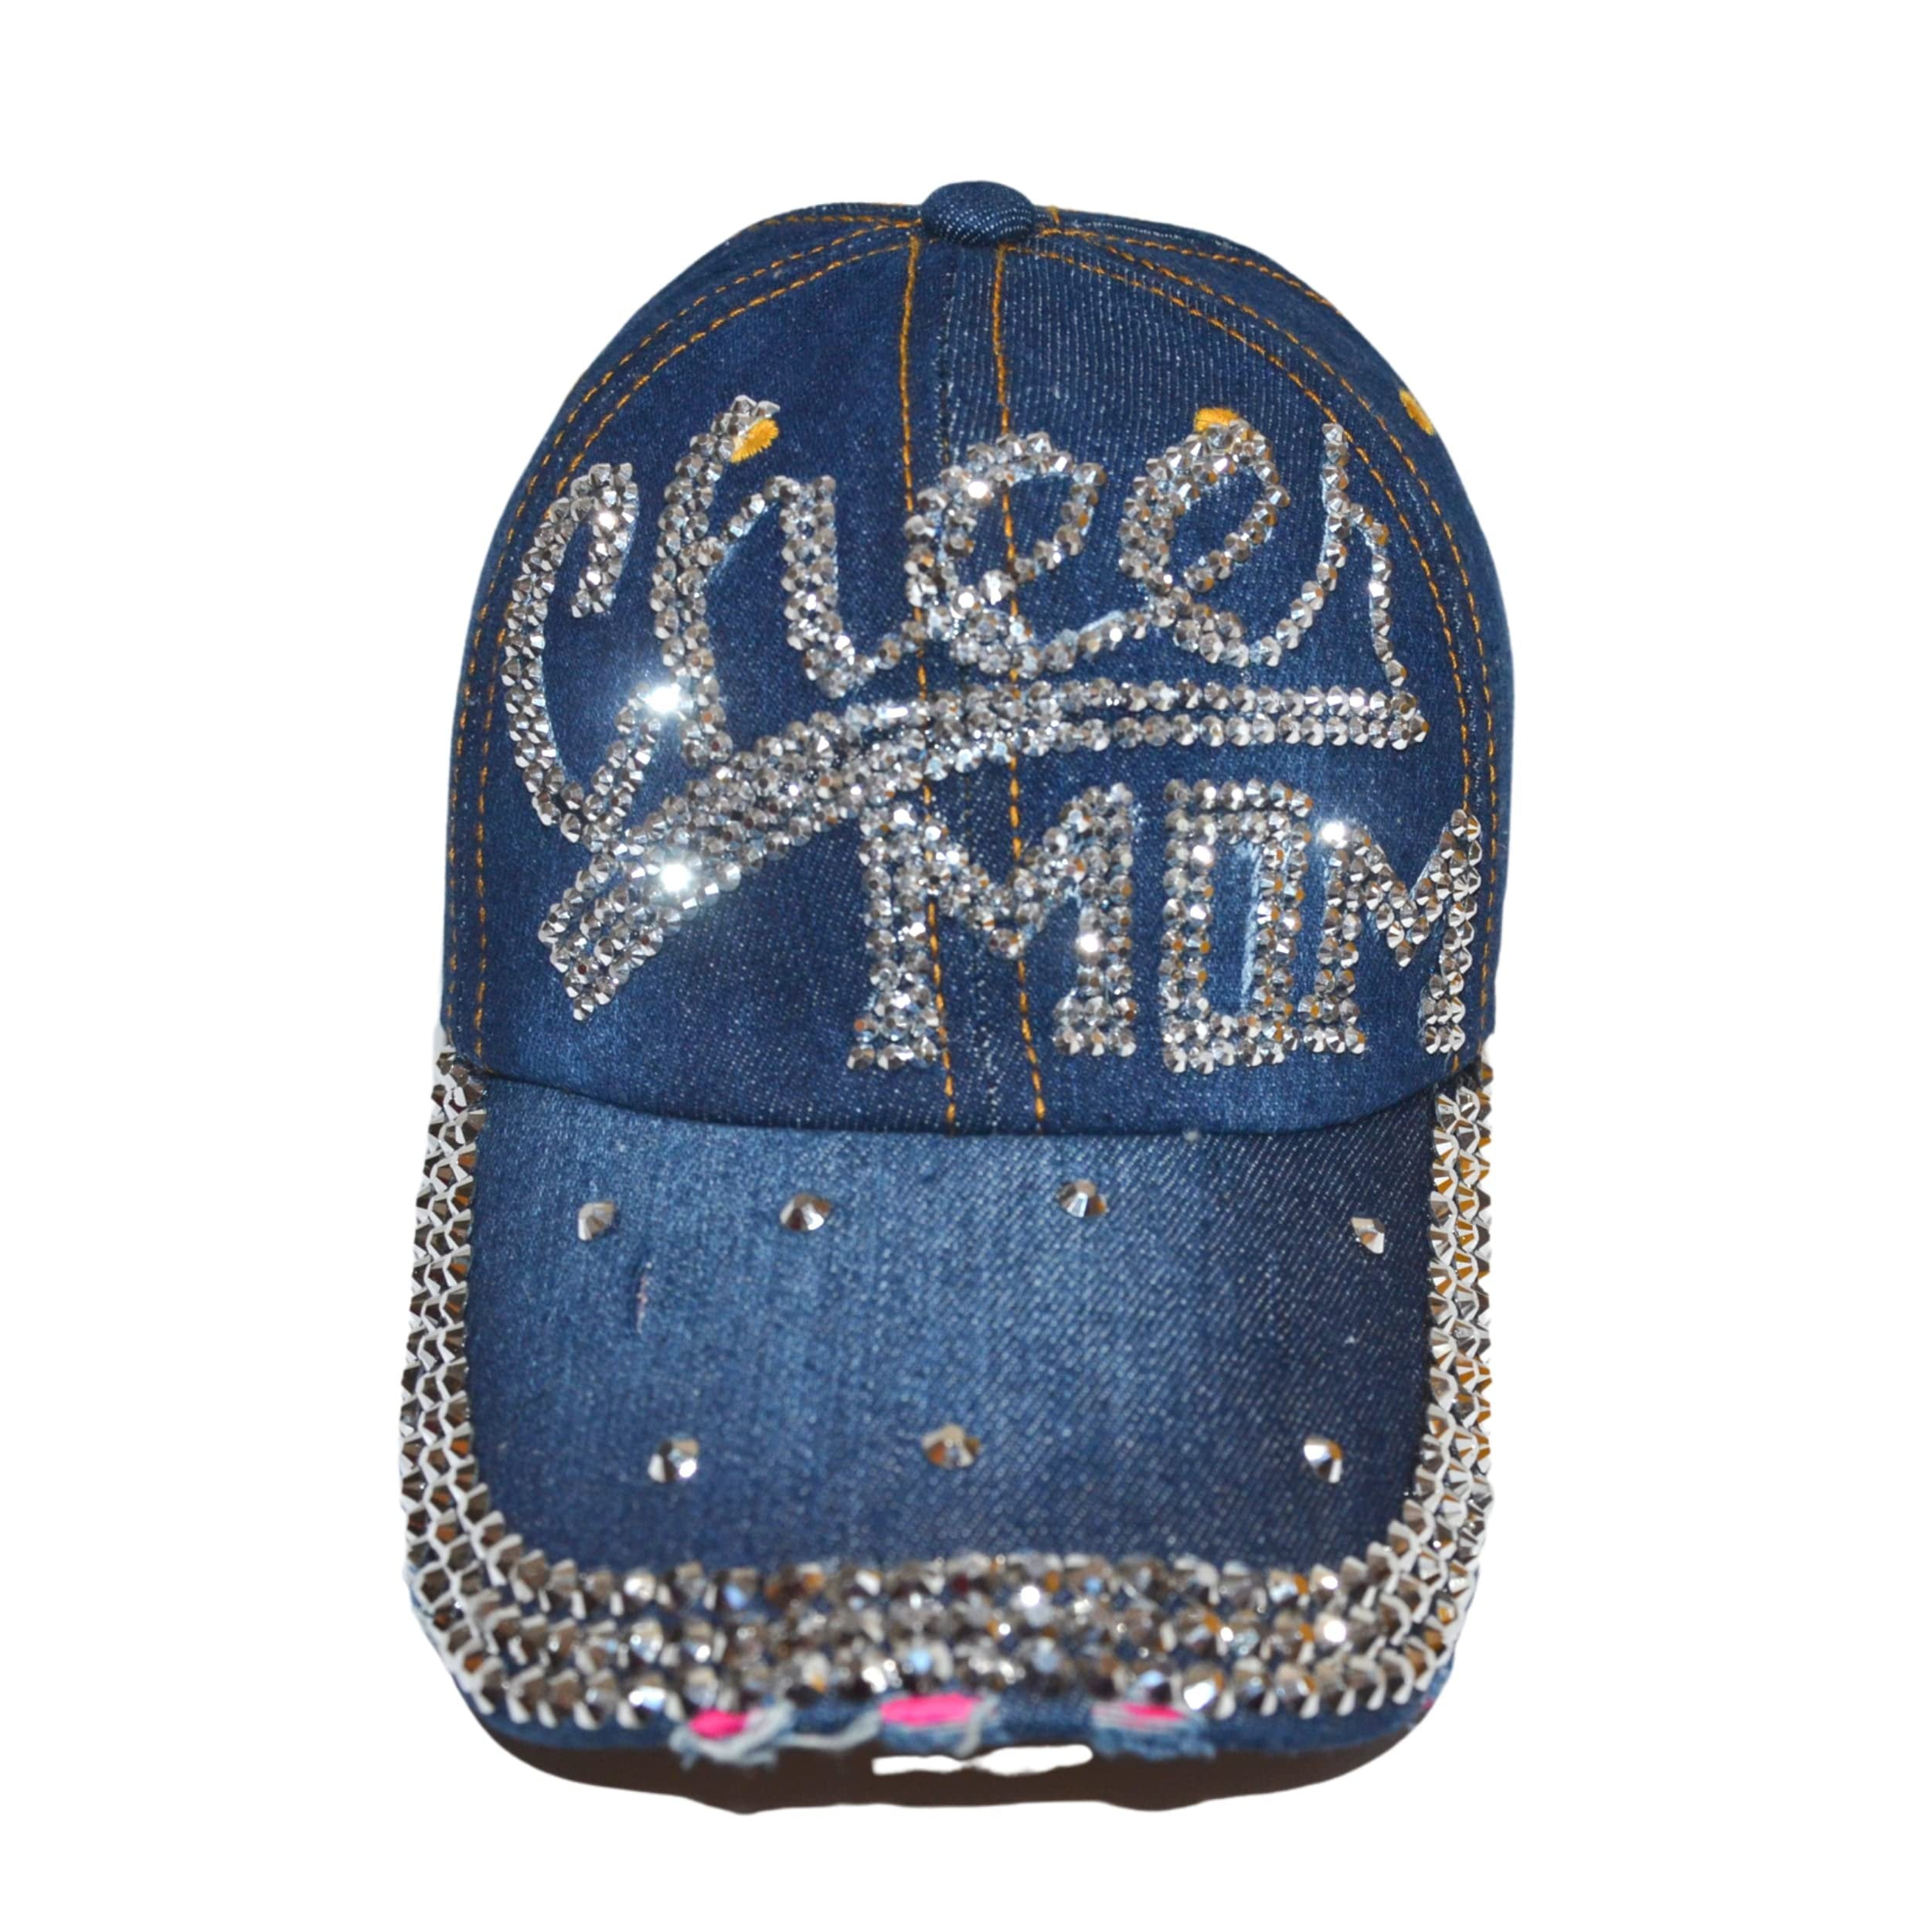 Letter M Women's Bling Baseball Cap Ladies Fashion Caps With